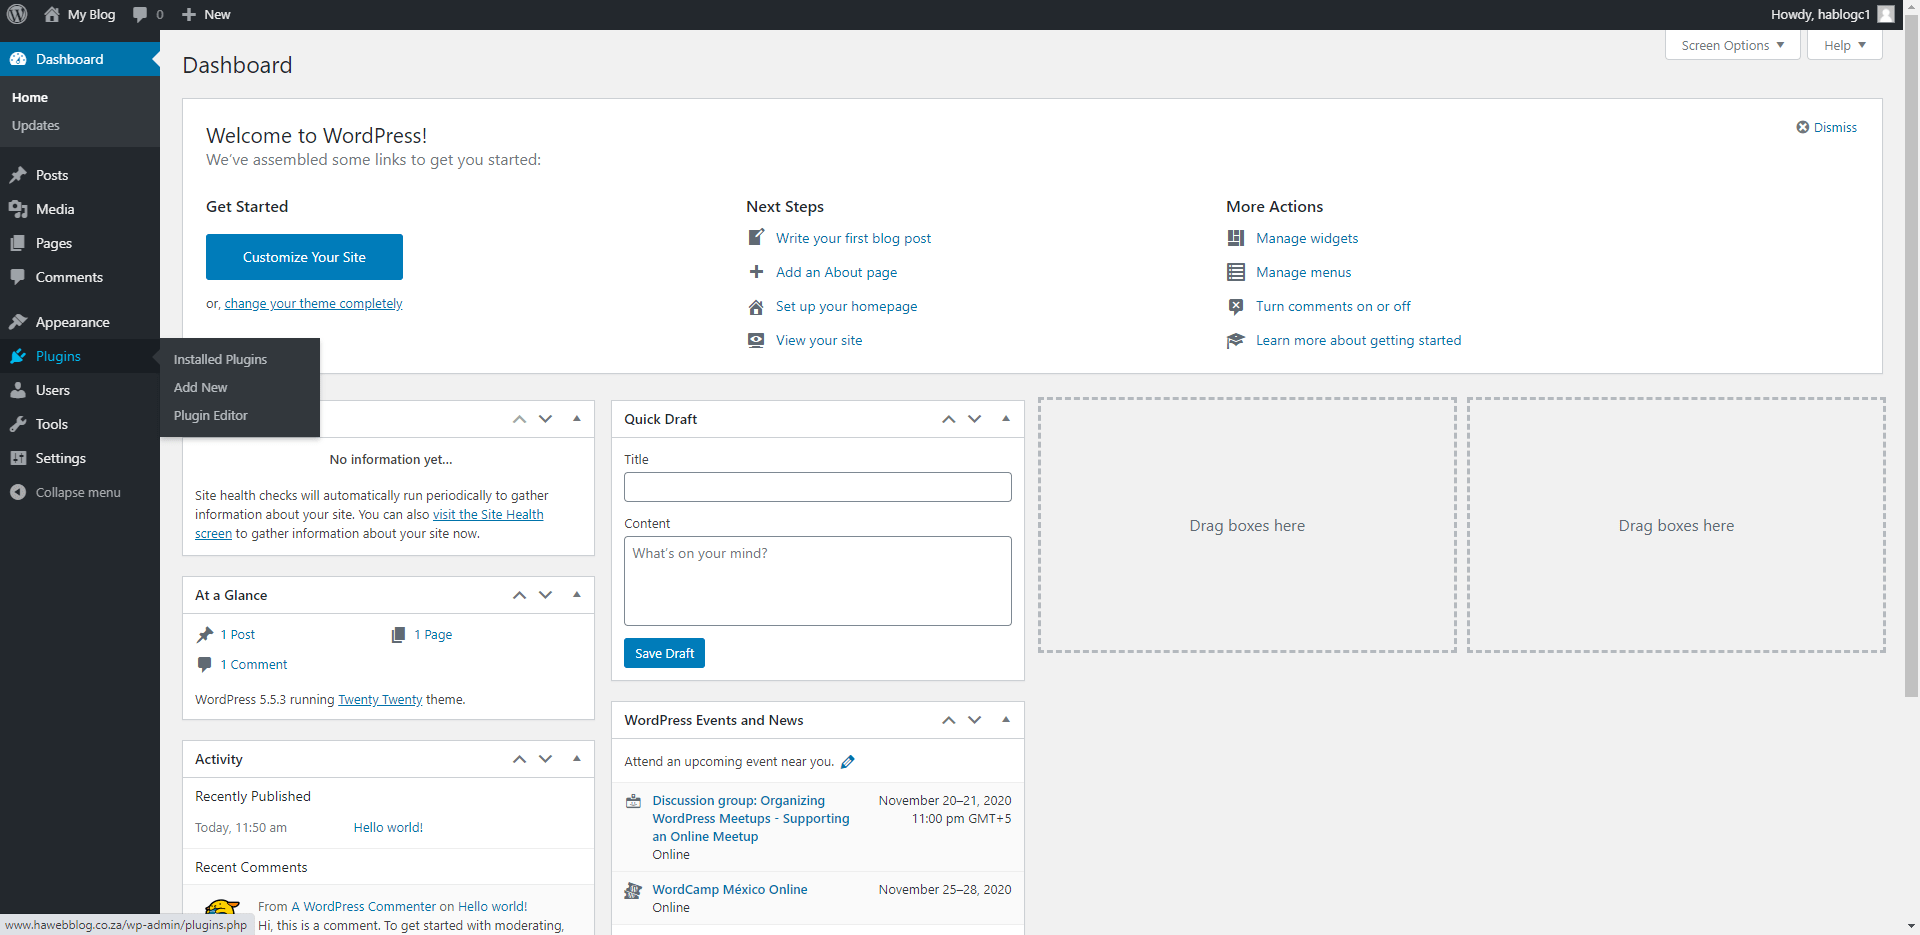 From the WordPress dashboard, go to Plugins and then click Add New.